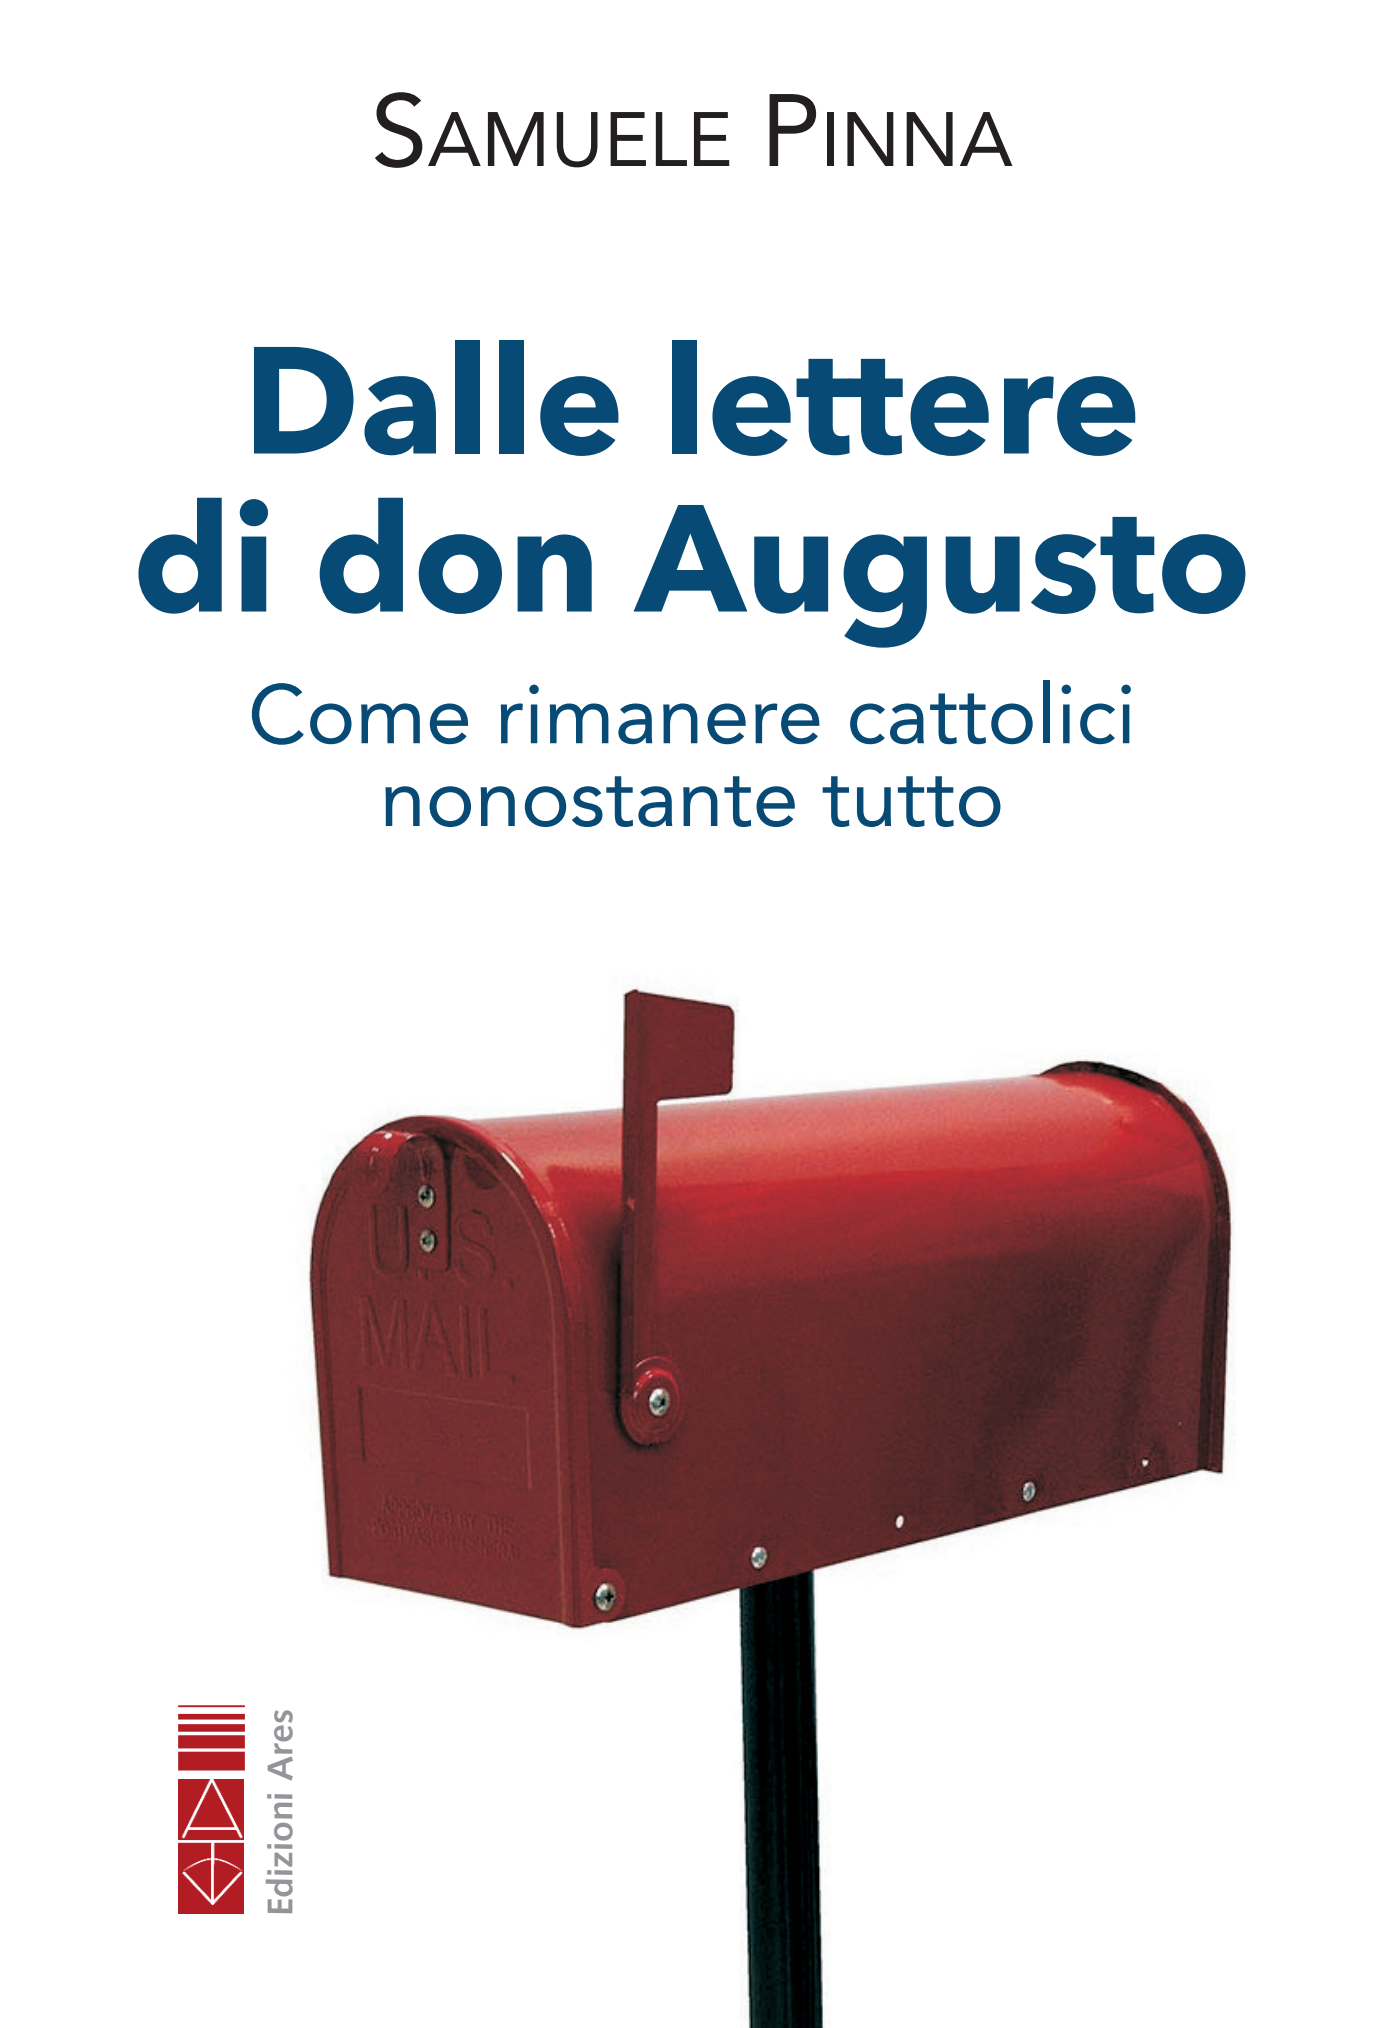 lettere-don-augusto-samuele-pinna.png